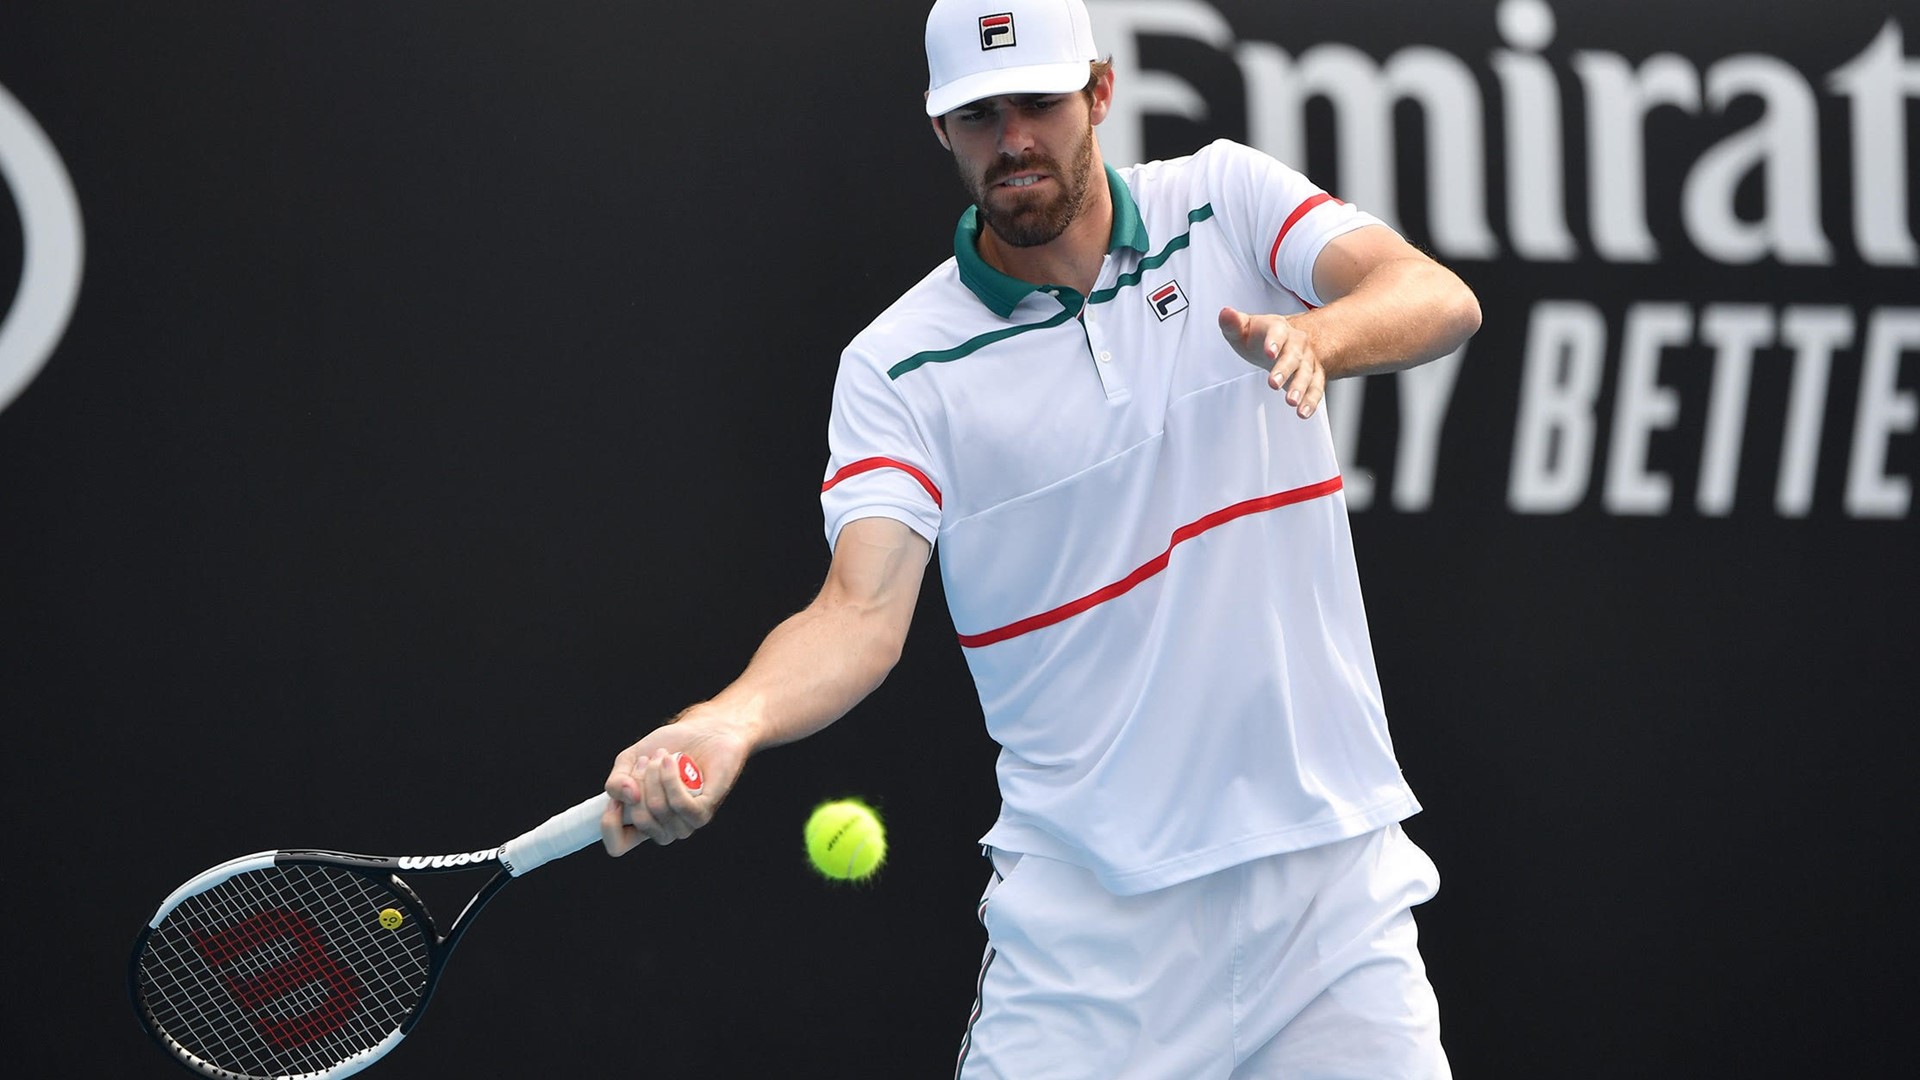 FILA Signs Sponsorship Agreement with ATP Tour Rising American Star Reilly Opelka